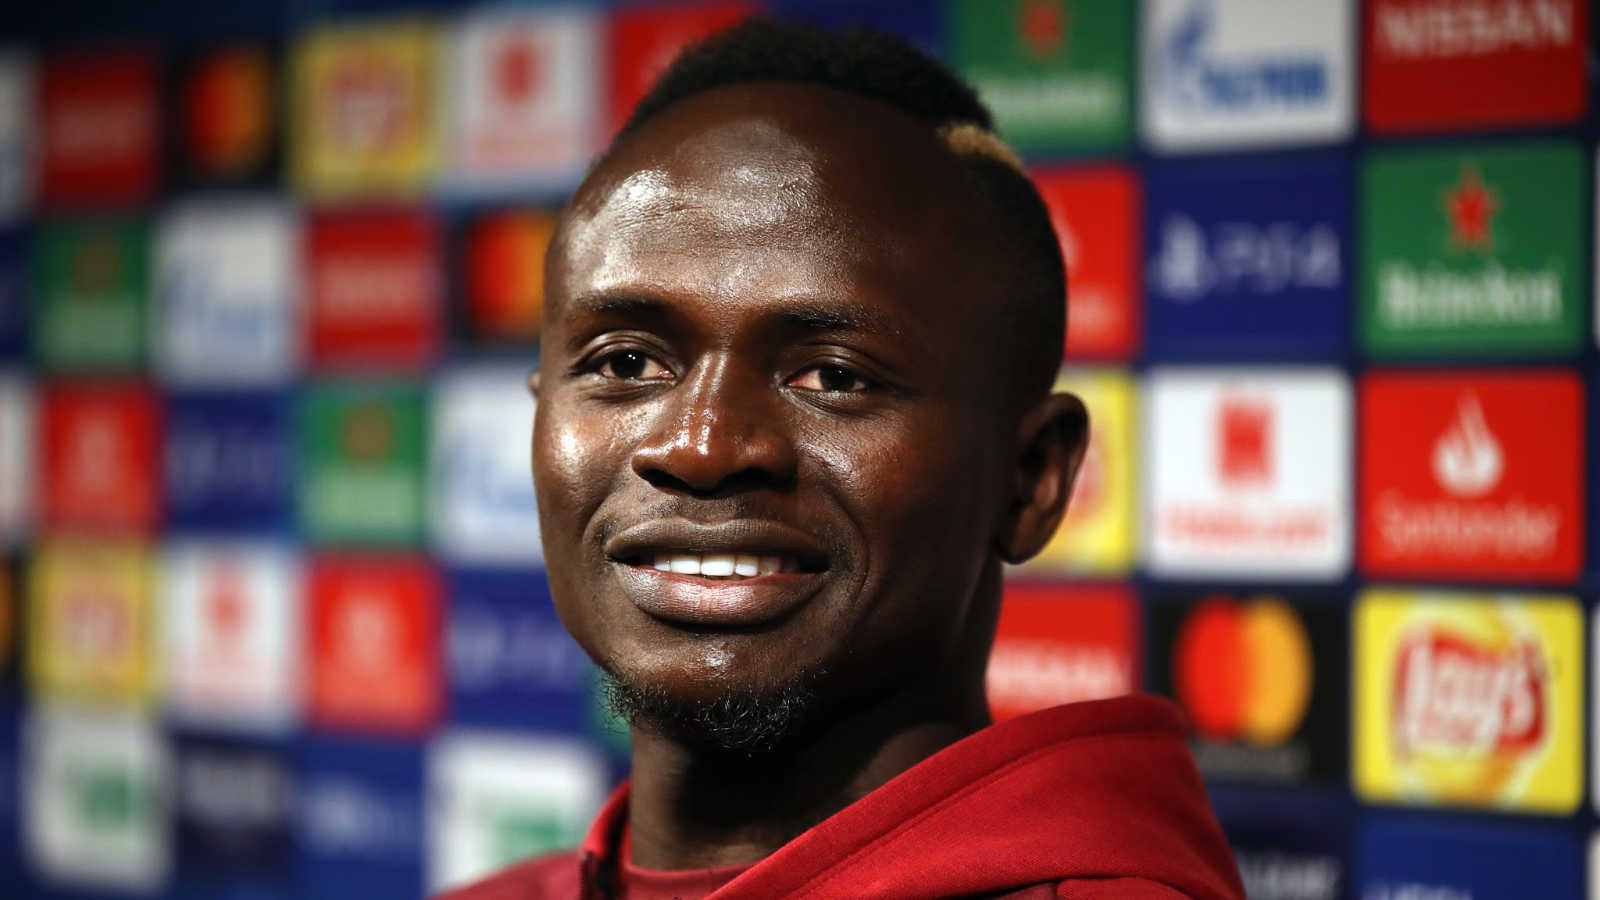 “We are going to win the league together” – Watch Sadio Mane’s fantastic message for Liverpool fans ahead of the Club World Cup in Qatar